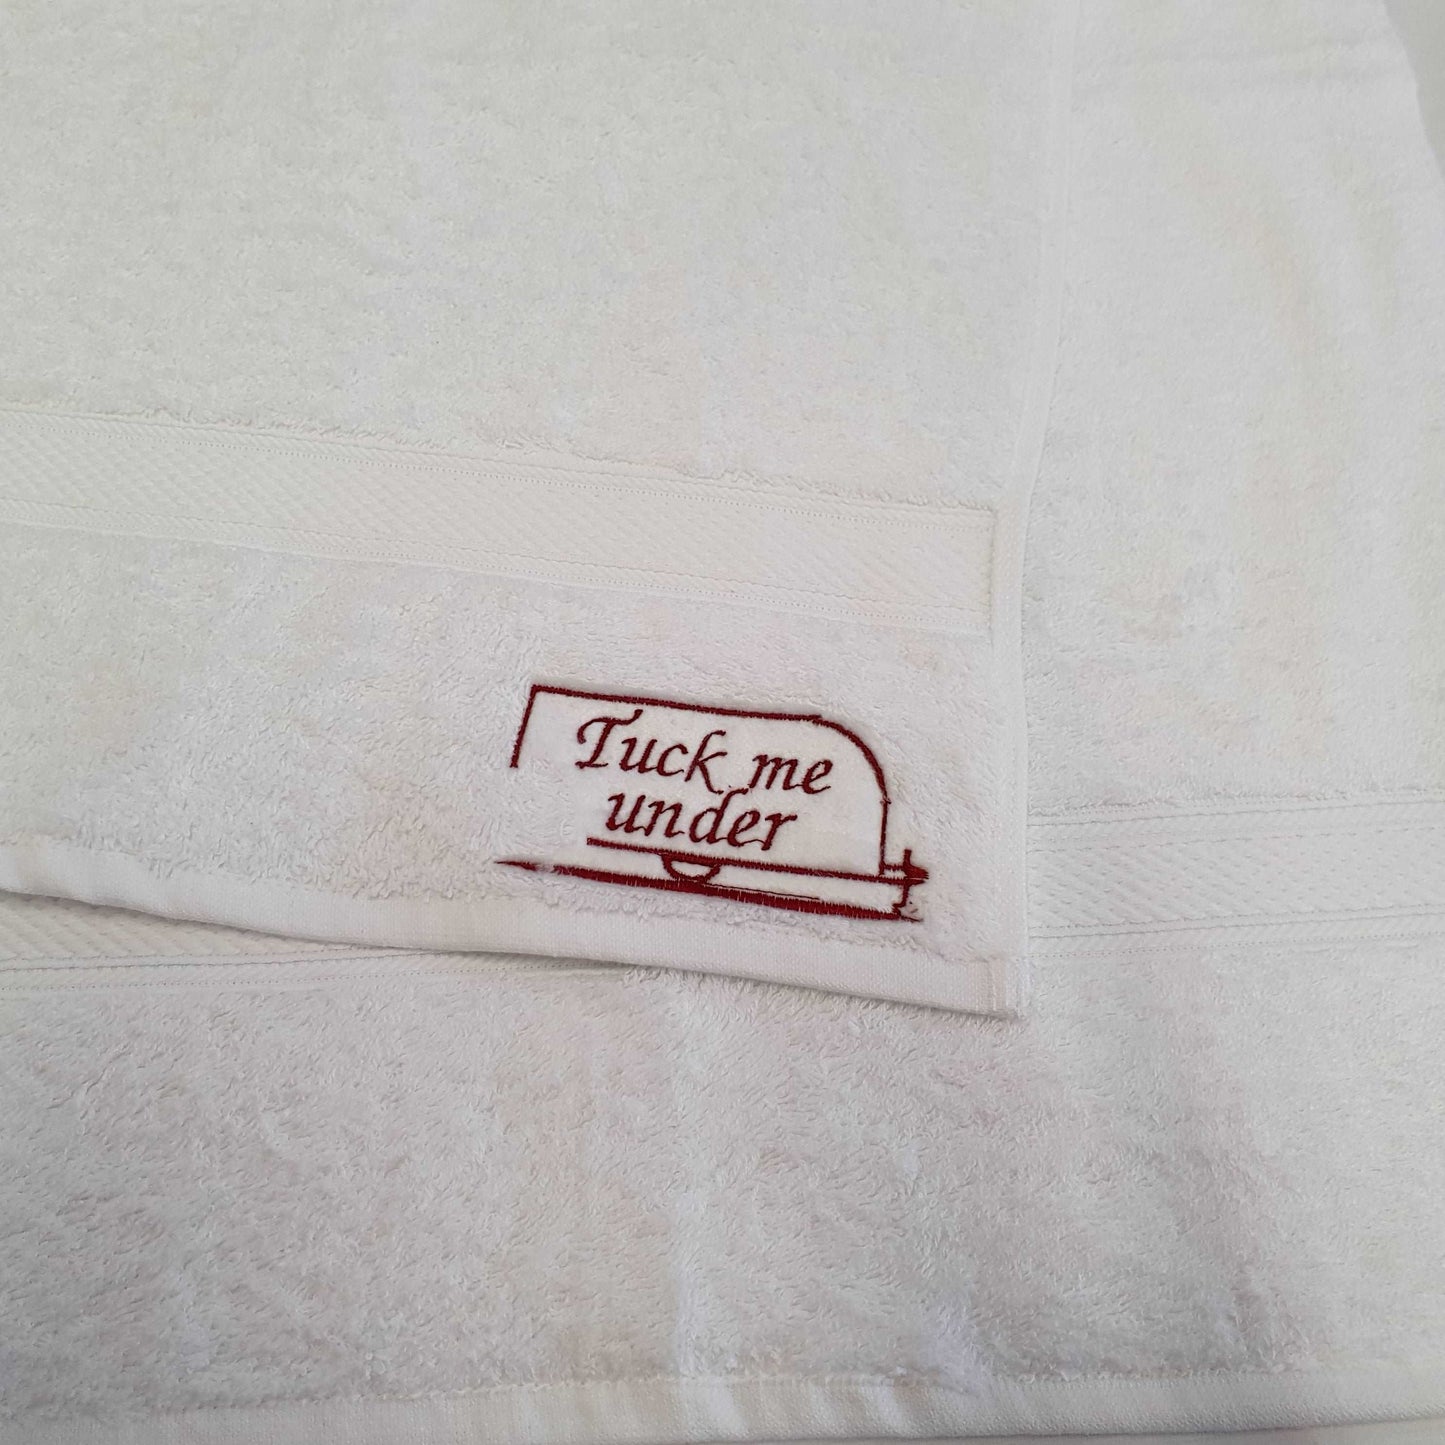 Bath towel with embroidery